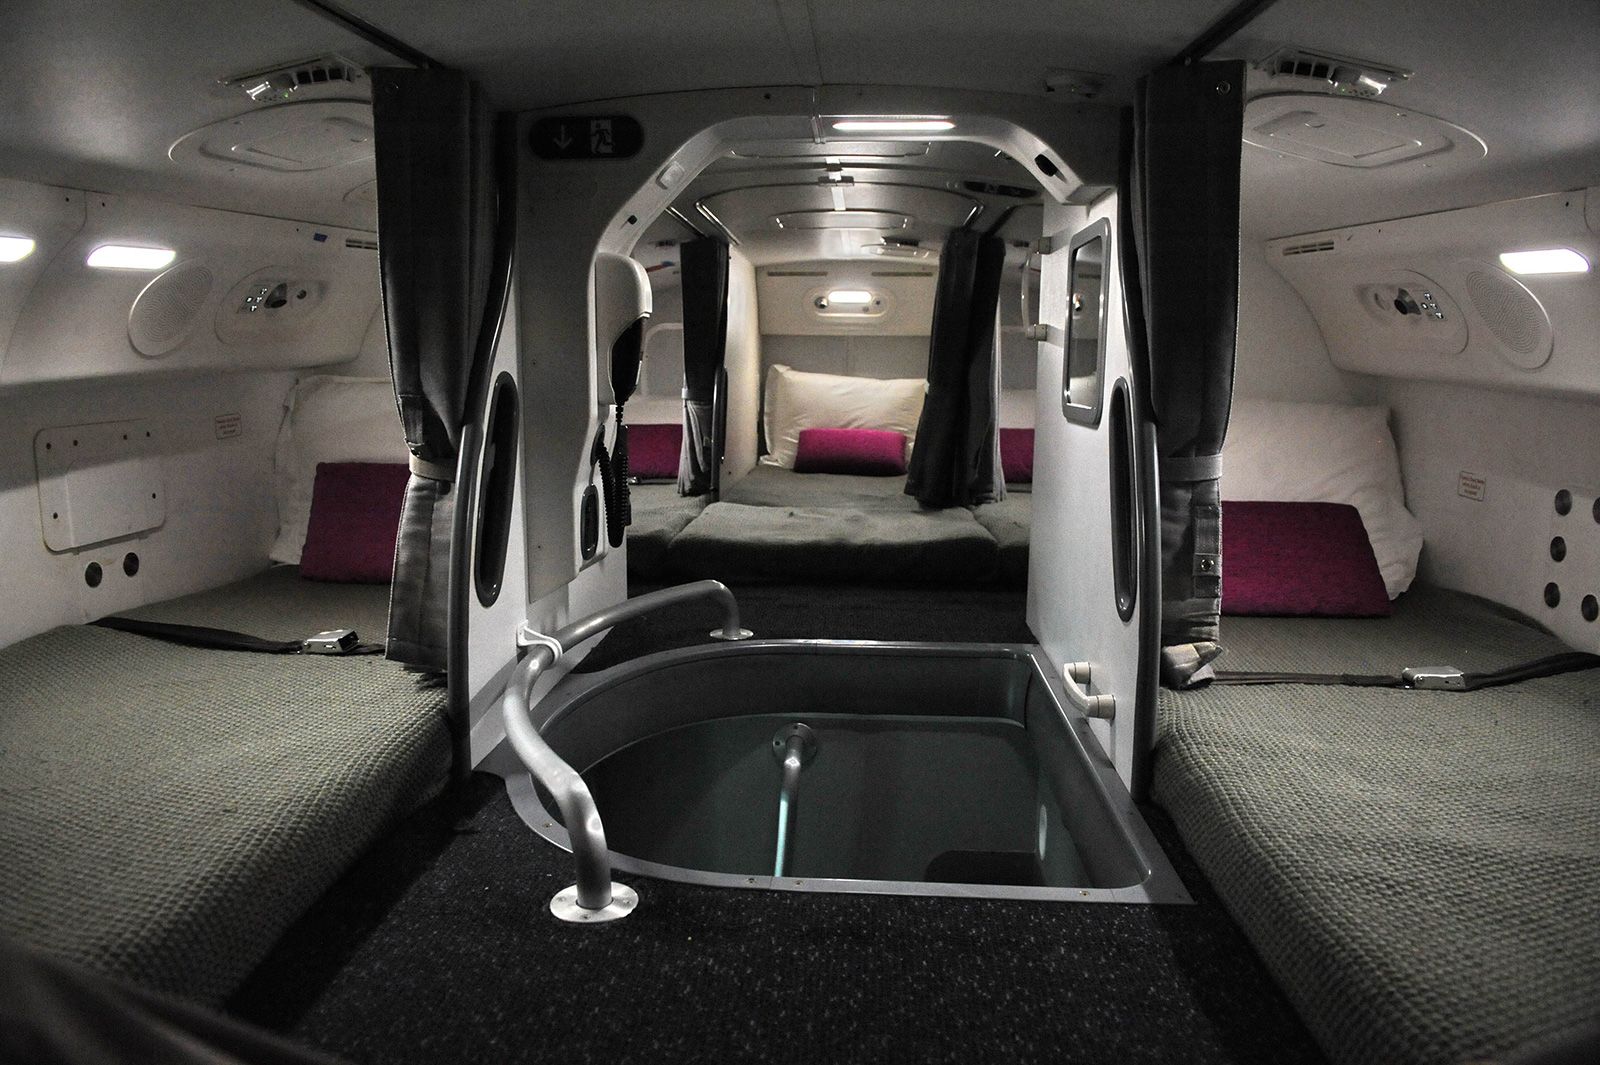 The hidden spaces on planes that are off limits to passengers